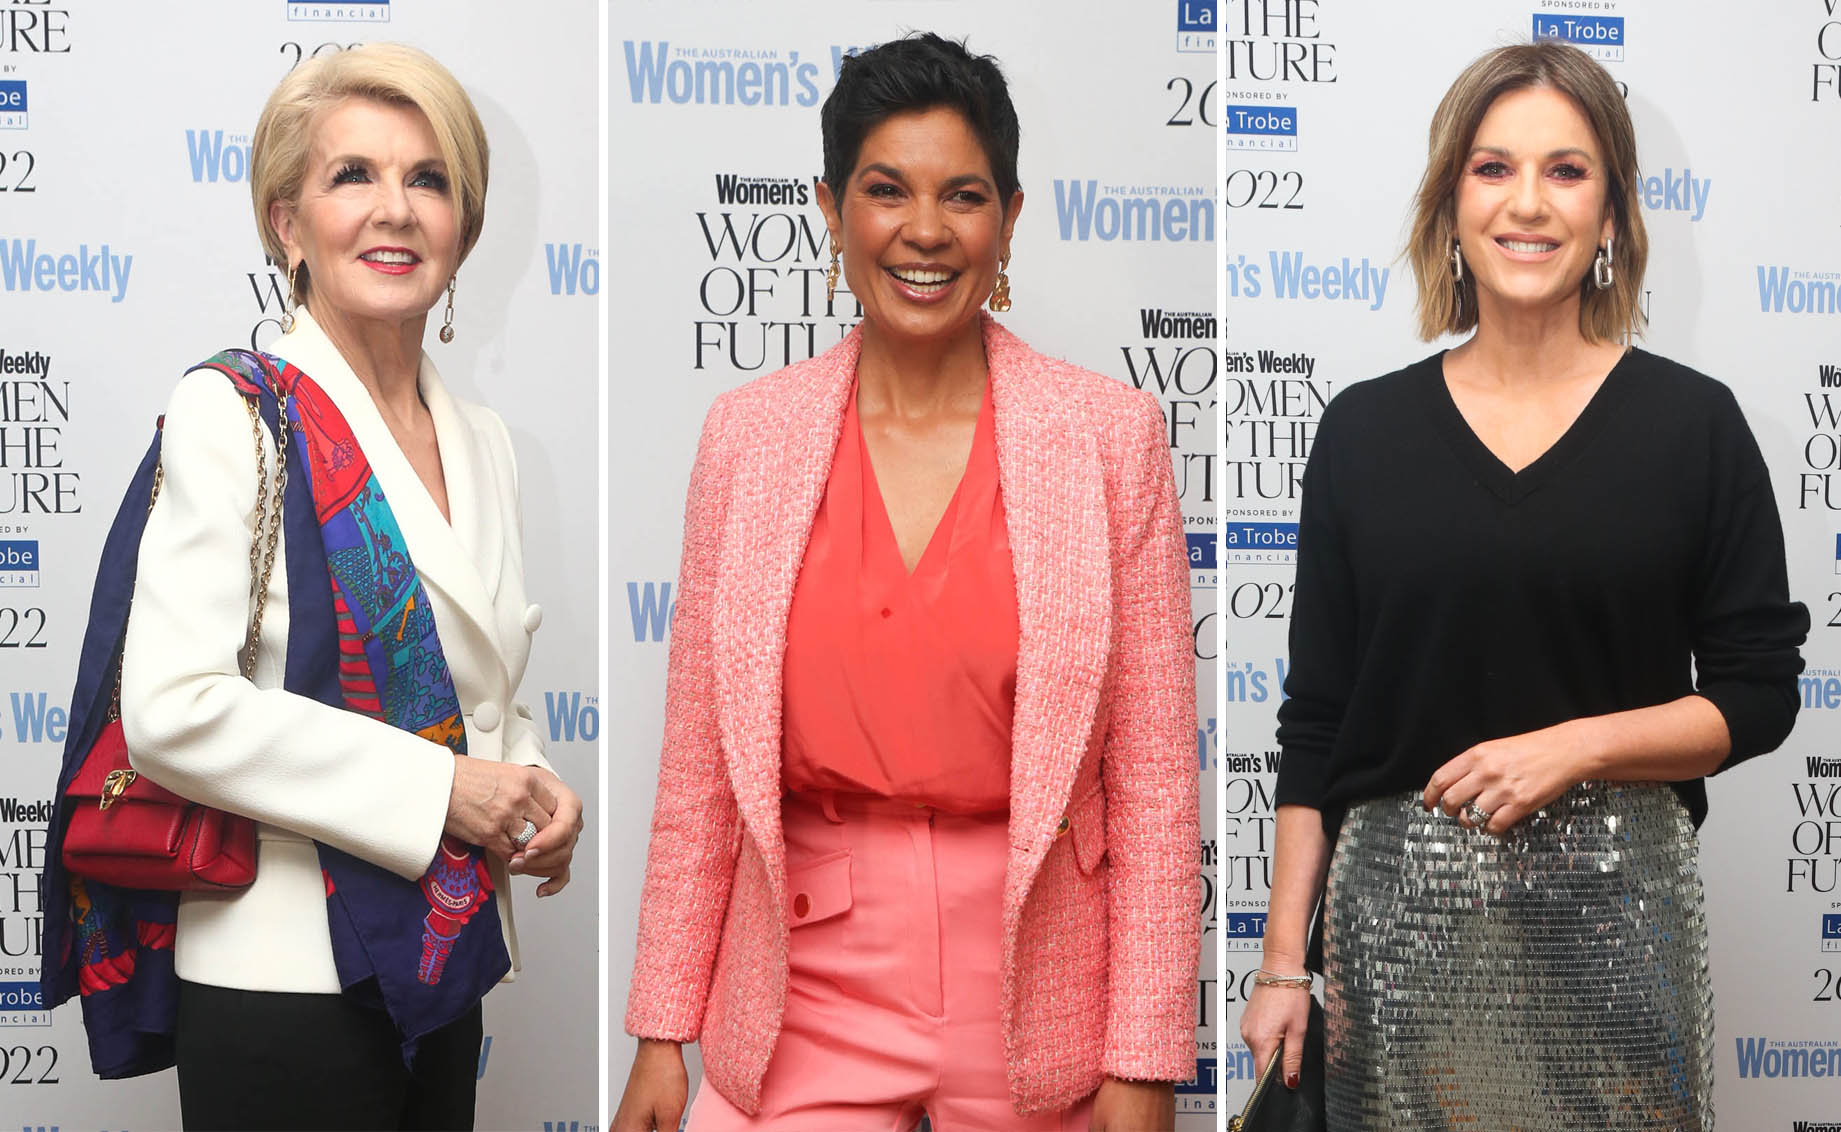 Game-changers and trailblazers light up the red carpet at the Women of the Future Awards